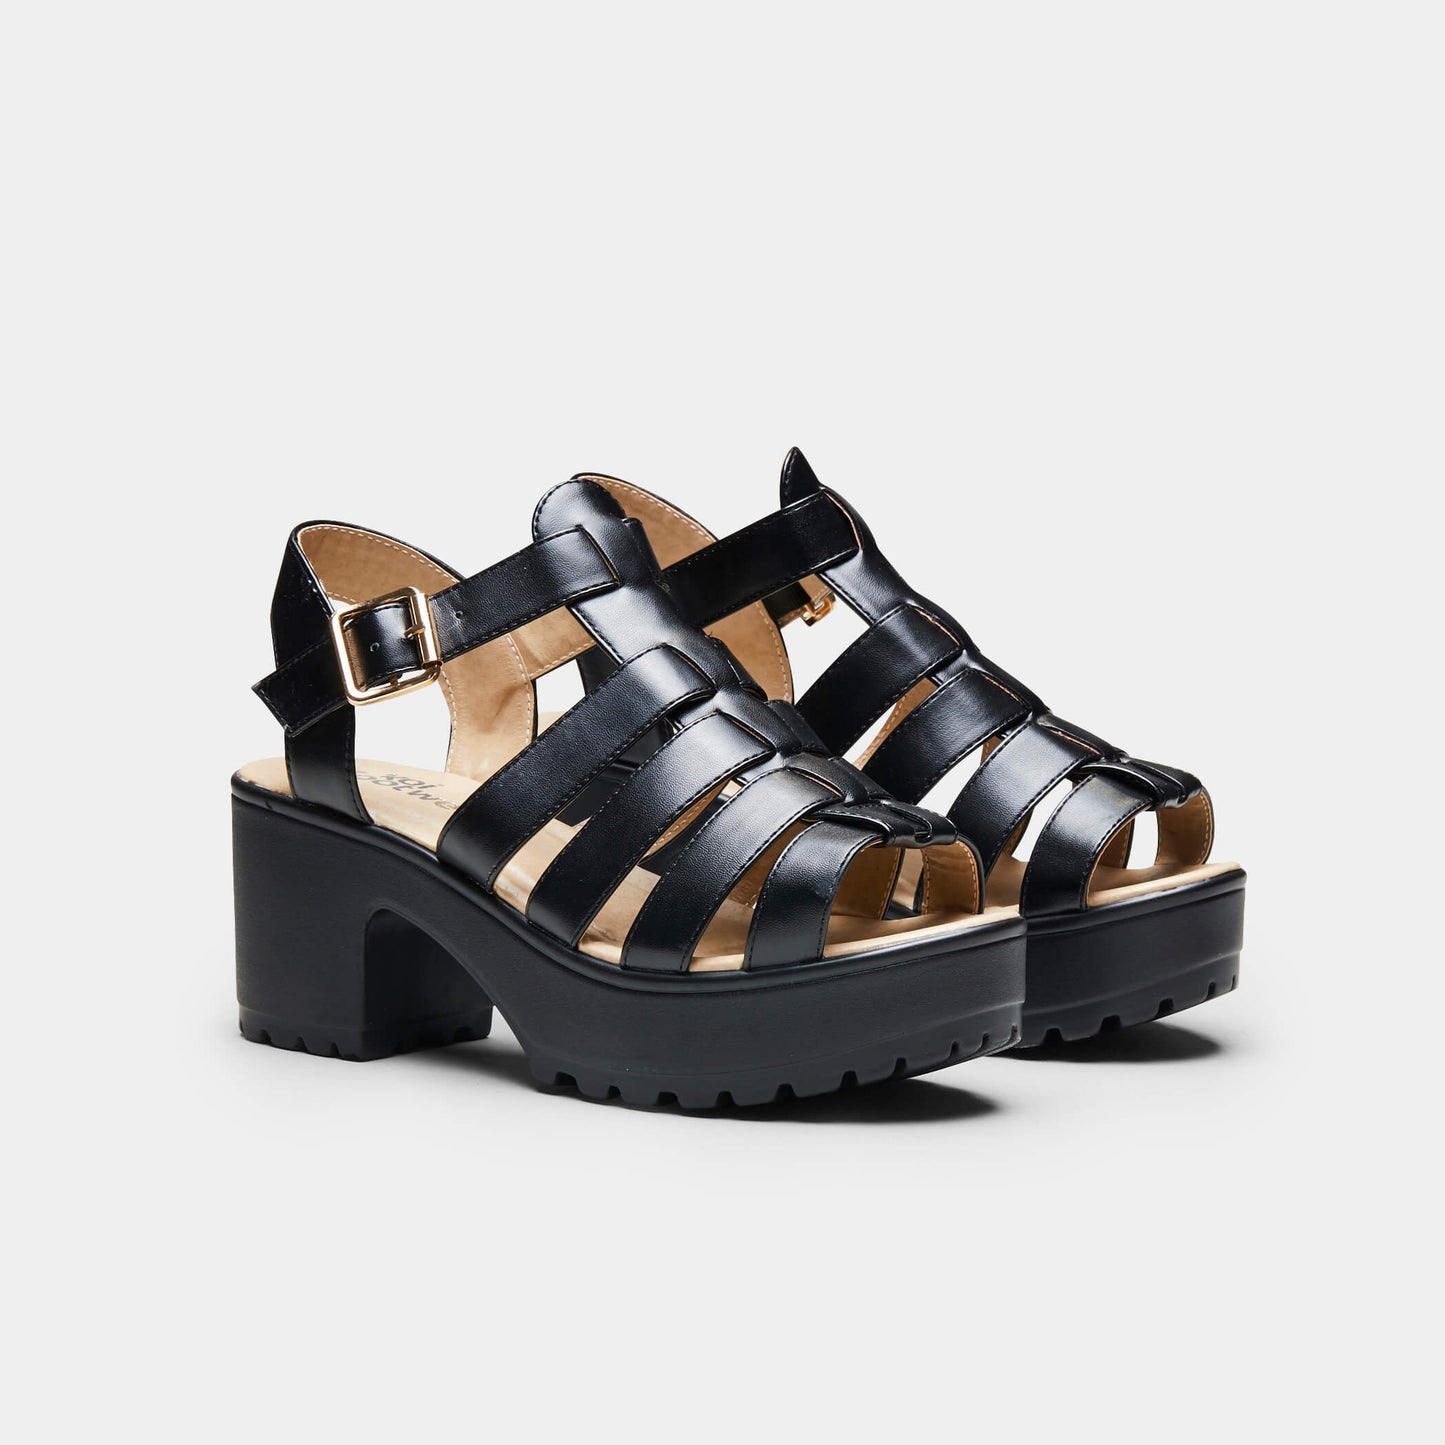 SII Black Strappy Cleated Sandals - Sandals - KOI Footwear - Black - Three-Quarter Model View